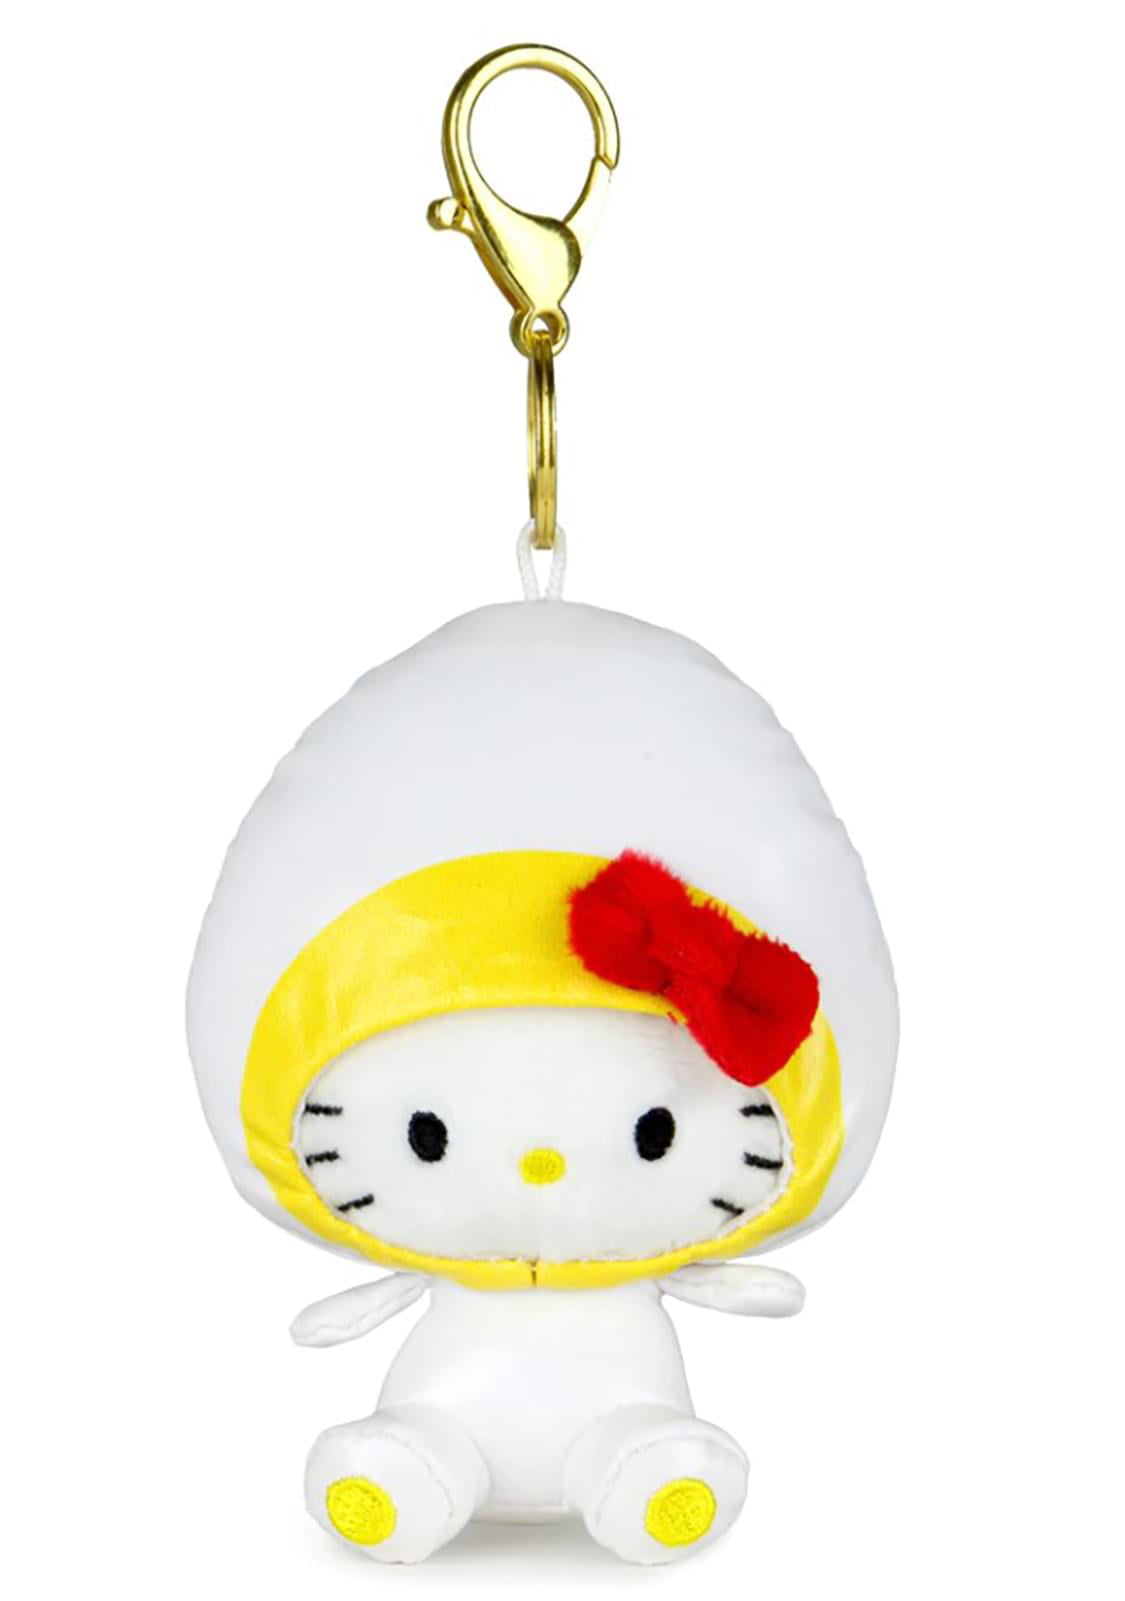 DIY Make your own sewing kit Hello Kitty Sanrio Keychain 